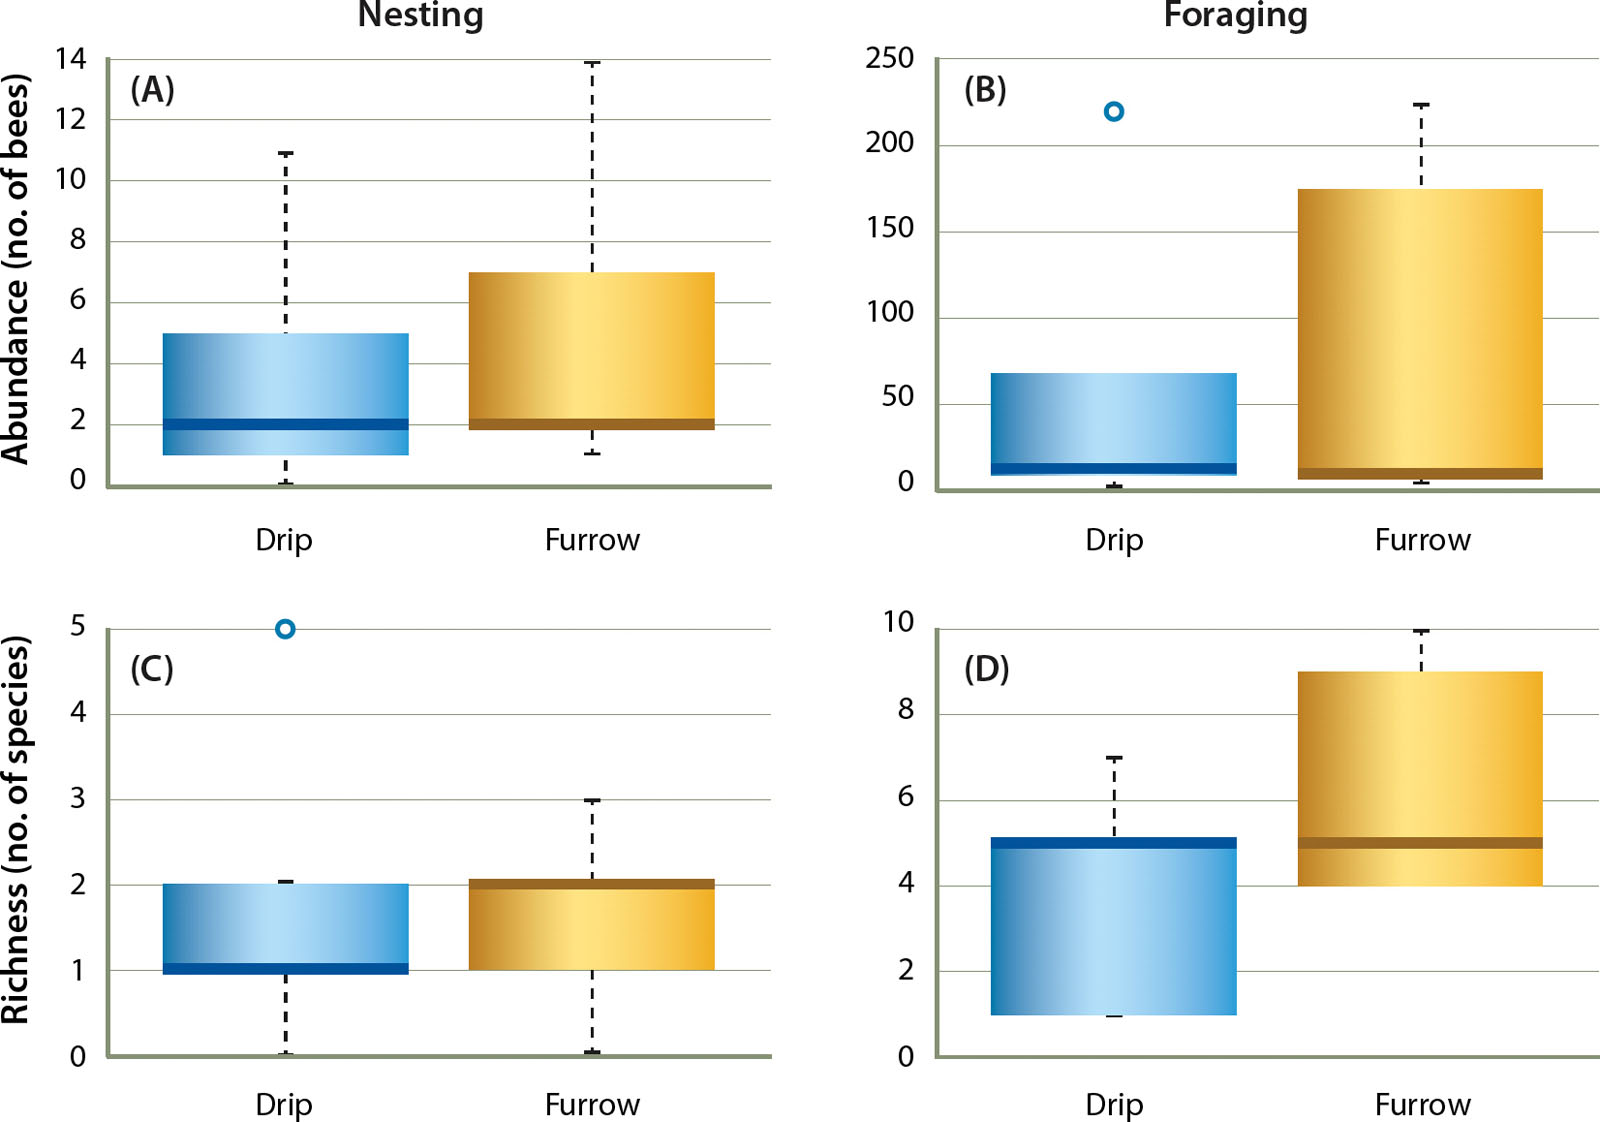 Irrigation method did not affect the abundance or species richness of nesting bees (A, C) or foraging bees (B, D) in sunflower fields. Boxes are upper and lower quartiles, dark bar is the mean, whiskers show the maximum and minimum values, and points are outliers.